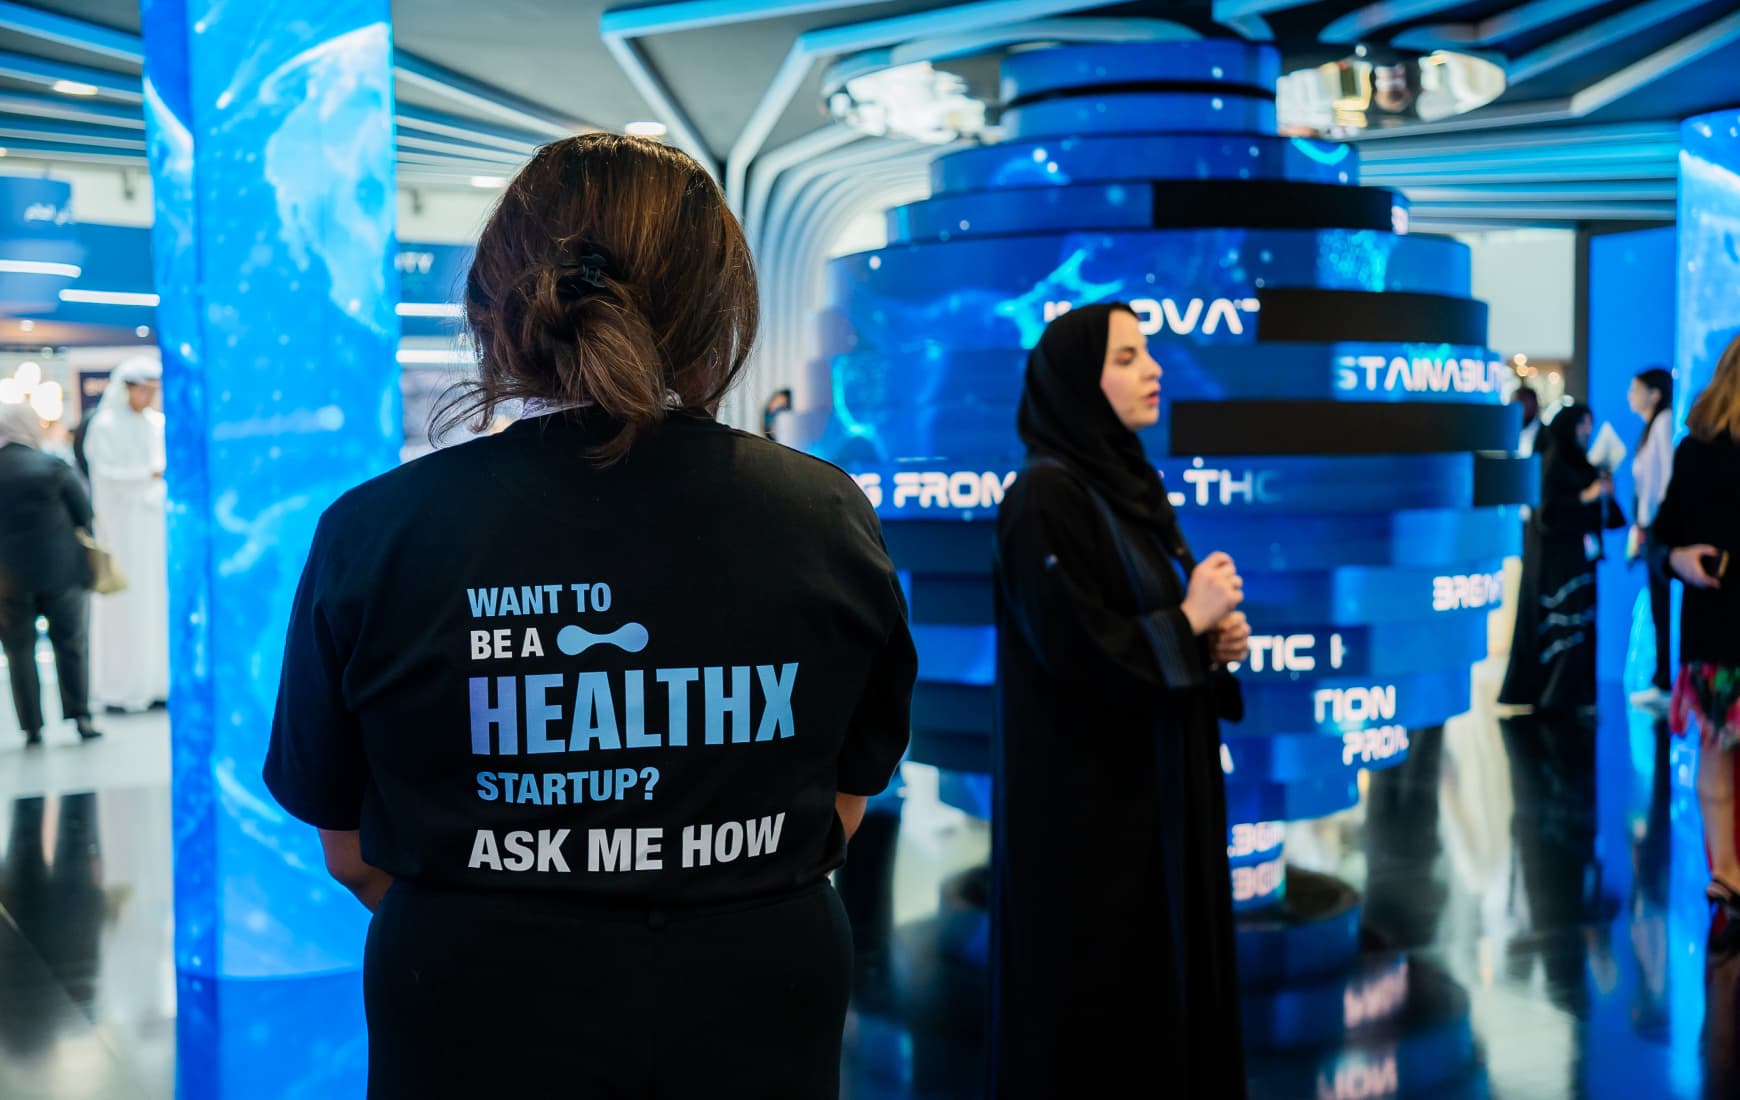 PROTECTED: THE UAE’S HEALTHCARE INDUSTRY: A PROMISING PLAYGROUND FOR GLOBAL GENAI STARTUPS news